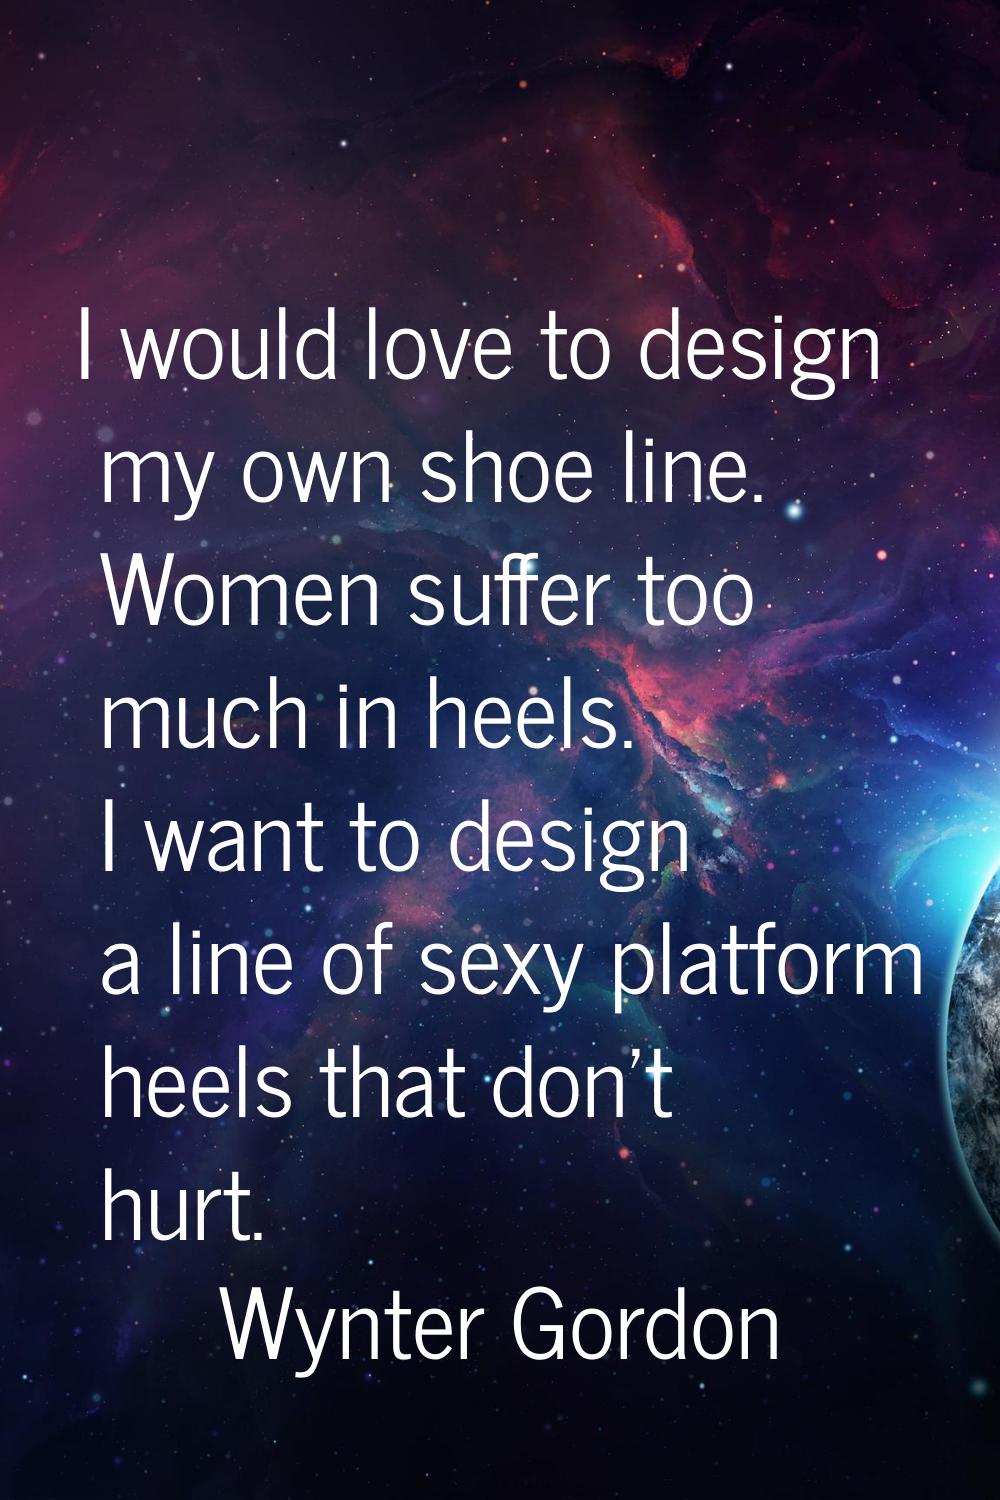 I would love to design my own shoe line. Women suffer too much in heels. I want to design a line of